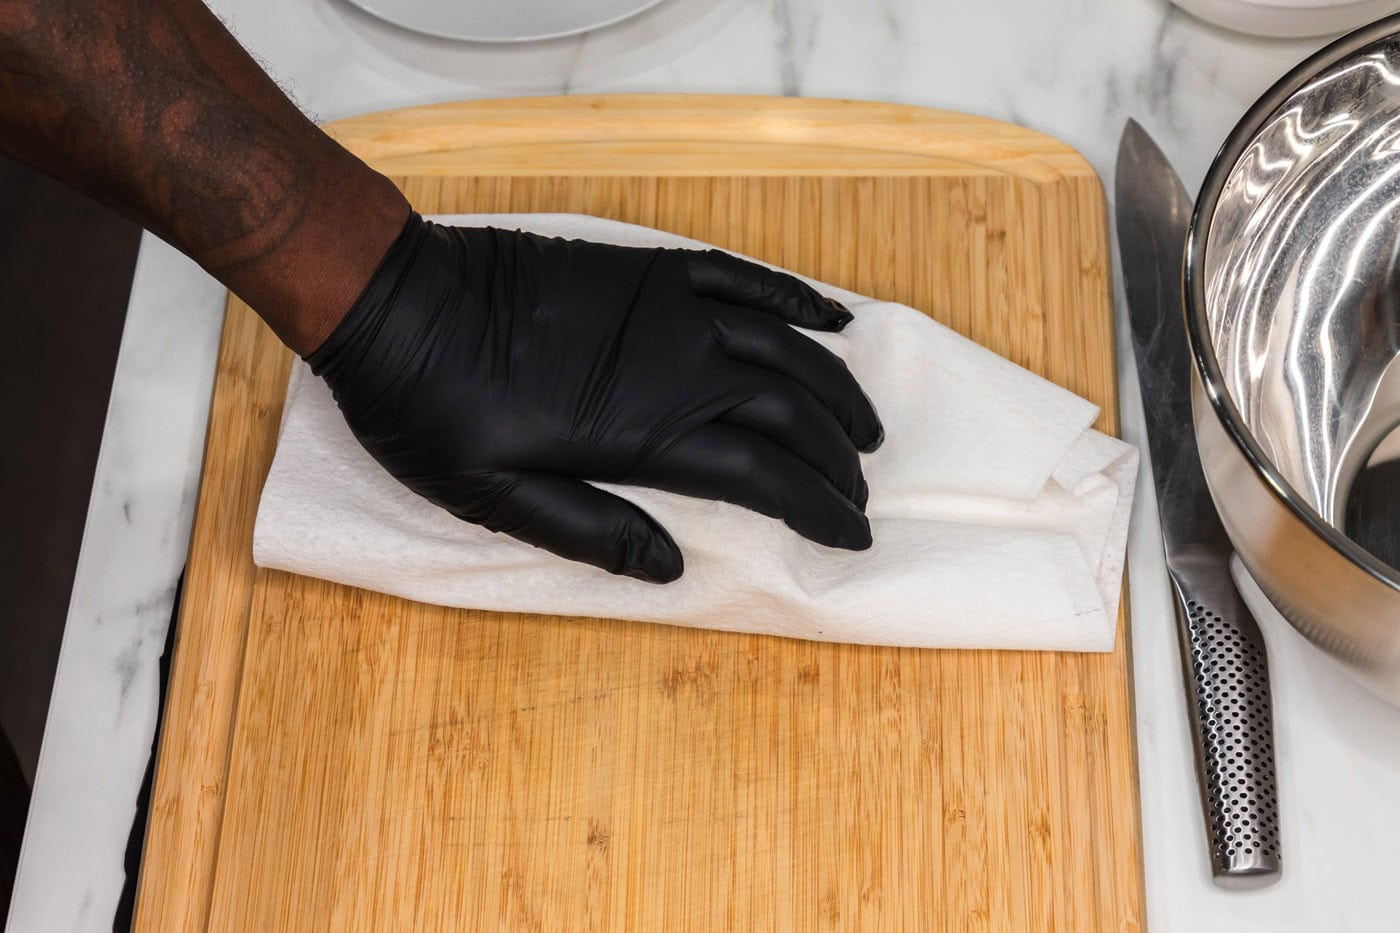 hand squeezing out excess moisture from tofu with a paper towel